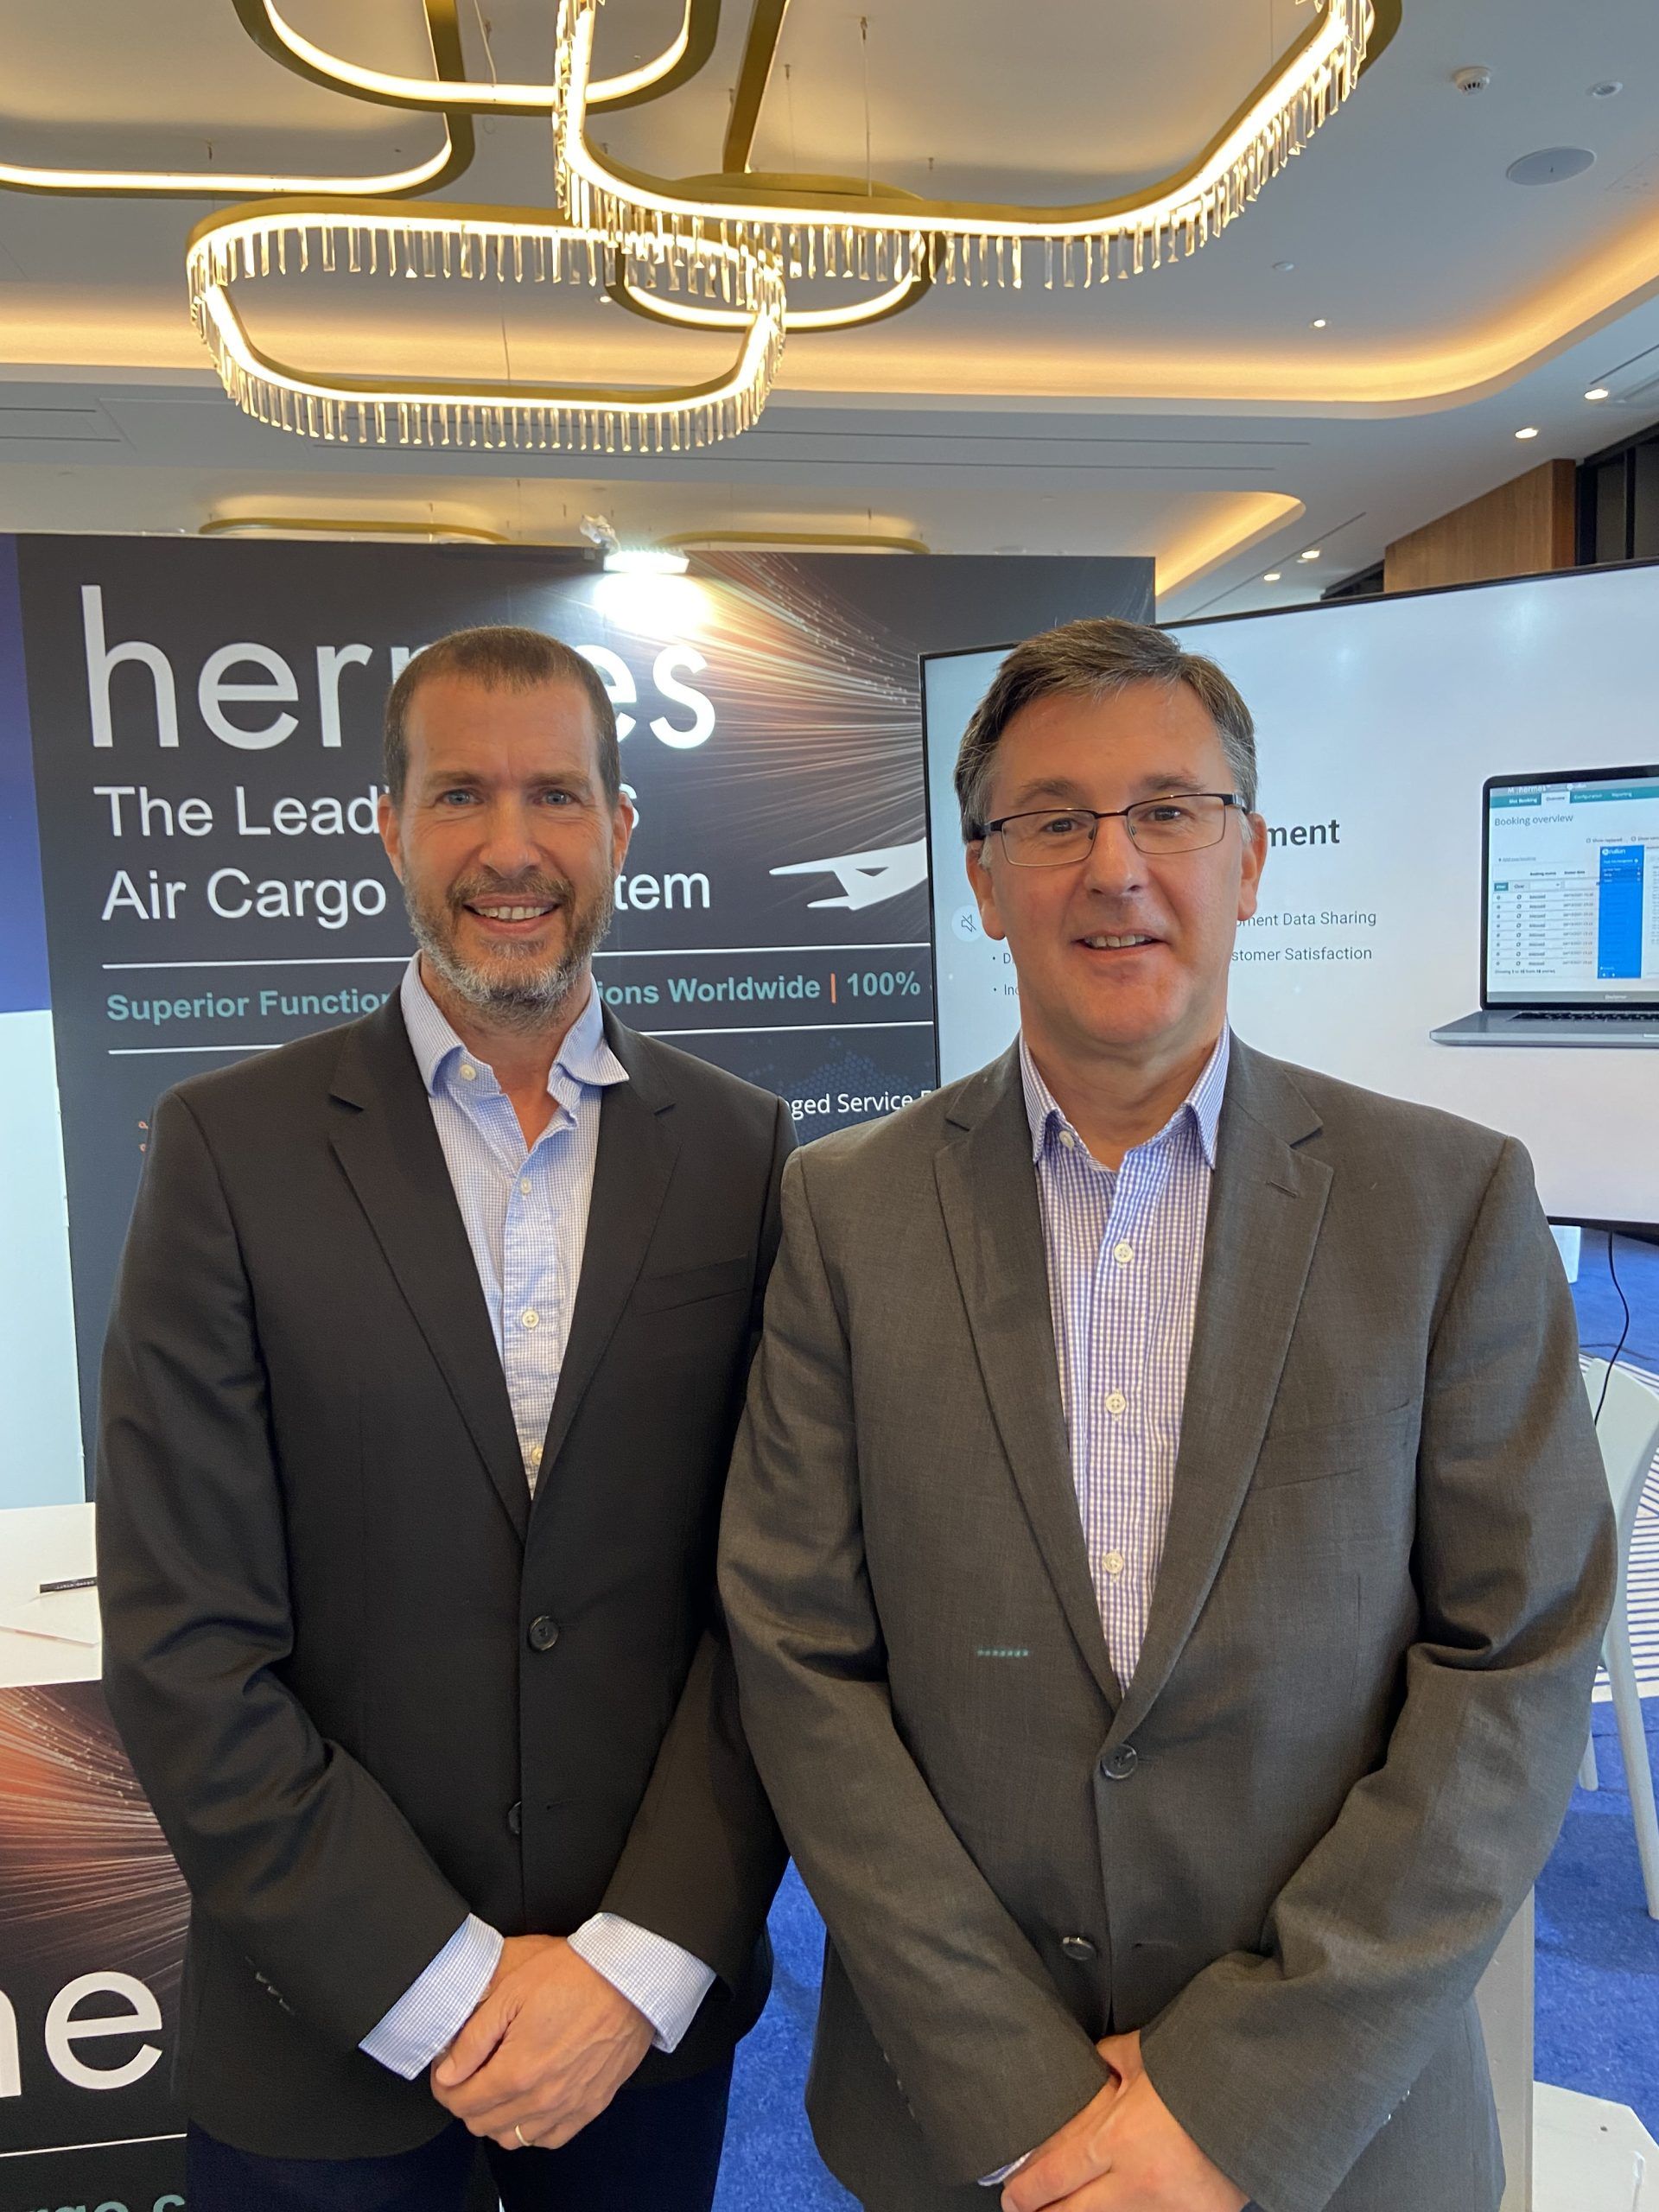 Yuval Baruch, CEO, HLT and Stuart Piper, Global Sales Director, HLT, unveiled the LMS at Air Cargo Handling & Logistics (ACHL).